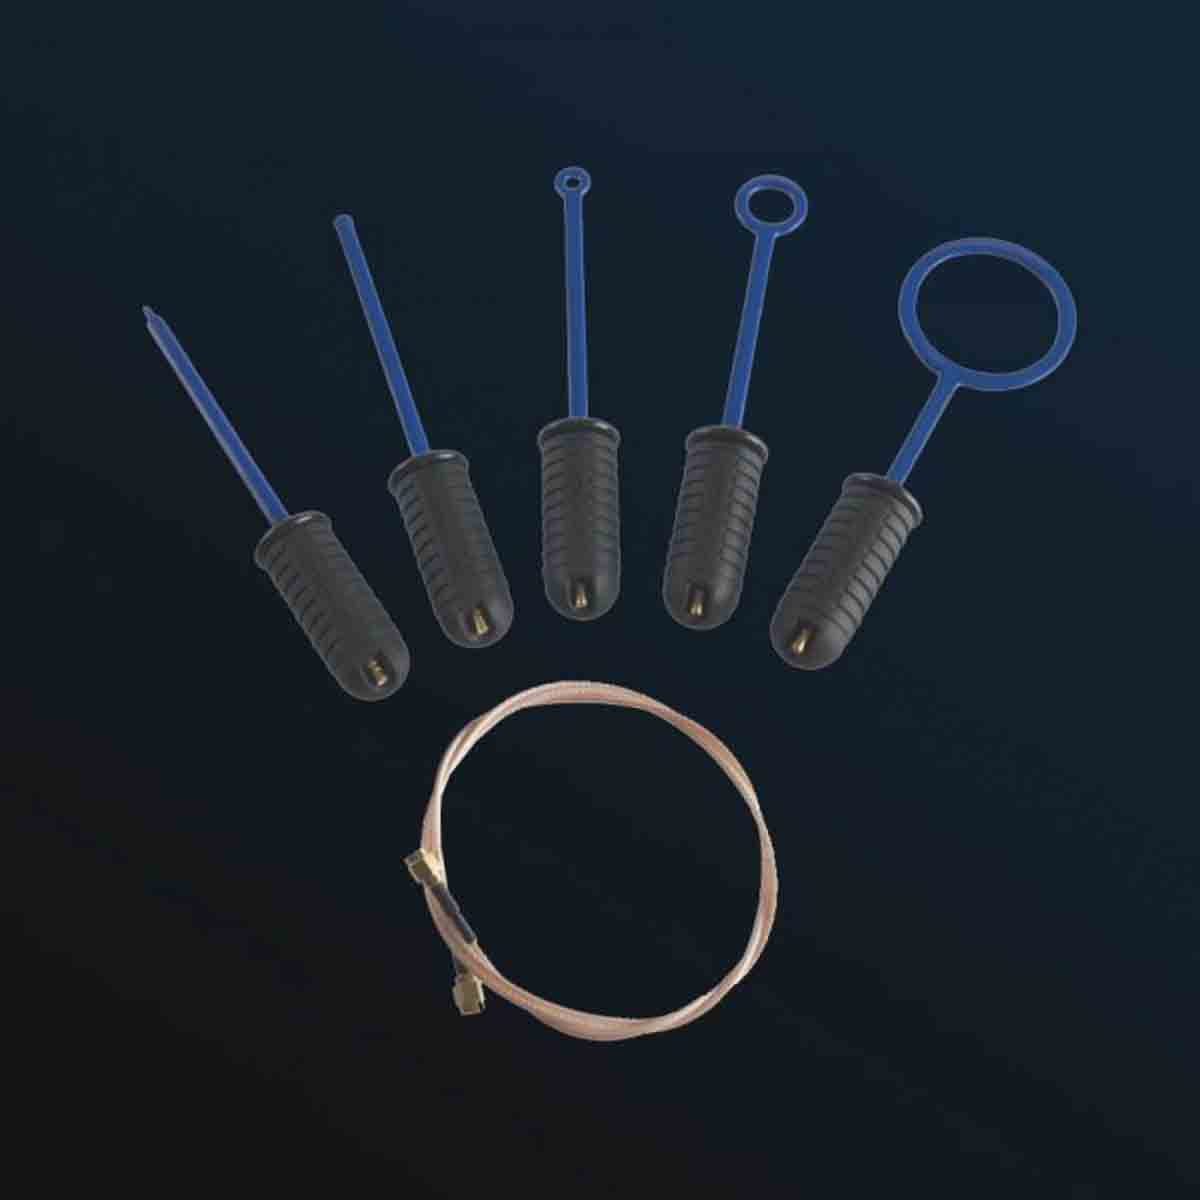 Aaronia Ag 203/002 Probe Set, For Use With spectrum analyzer